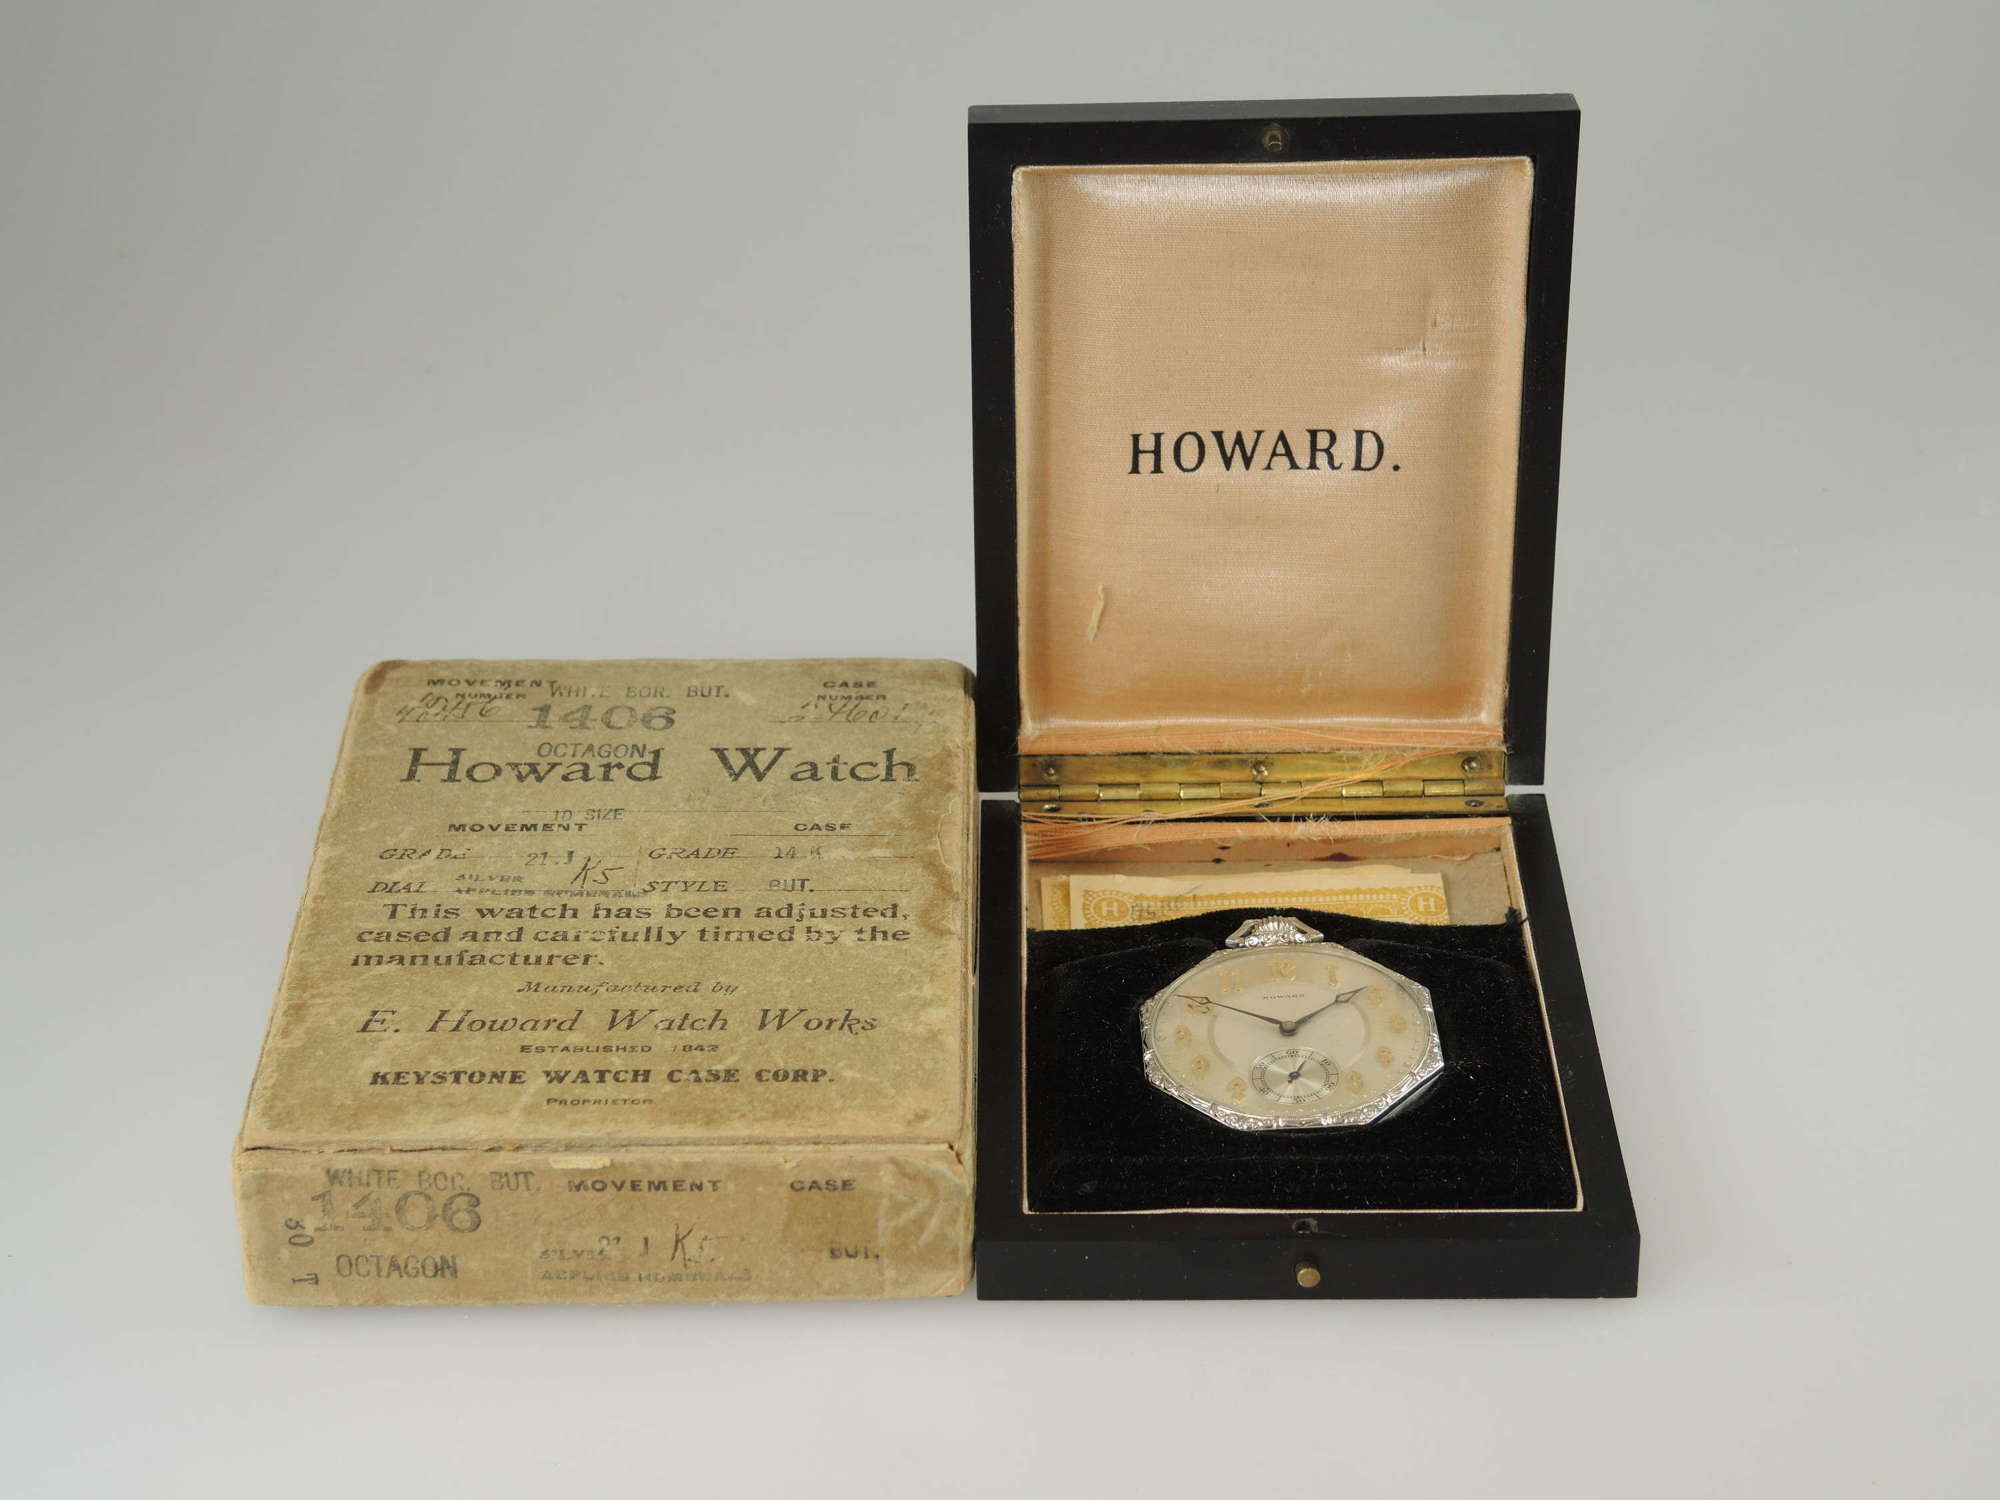 Unused 14K white gold Howard pocket watch with original boxes c1923